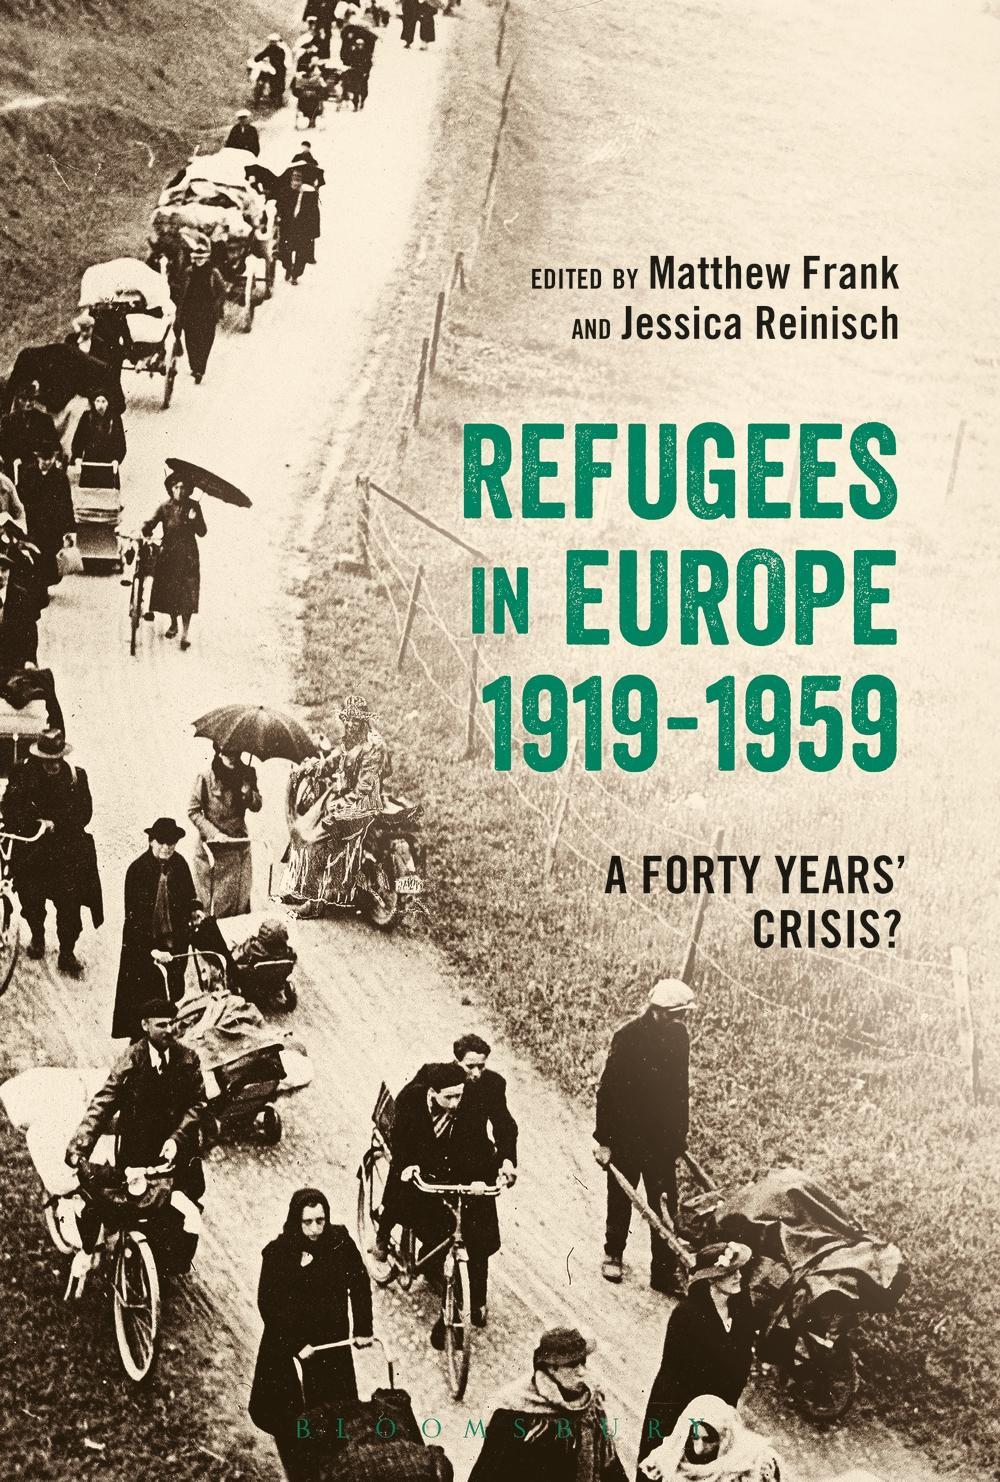 Refugees in Europe, 1919-1959